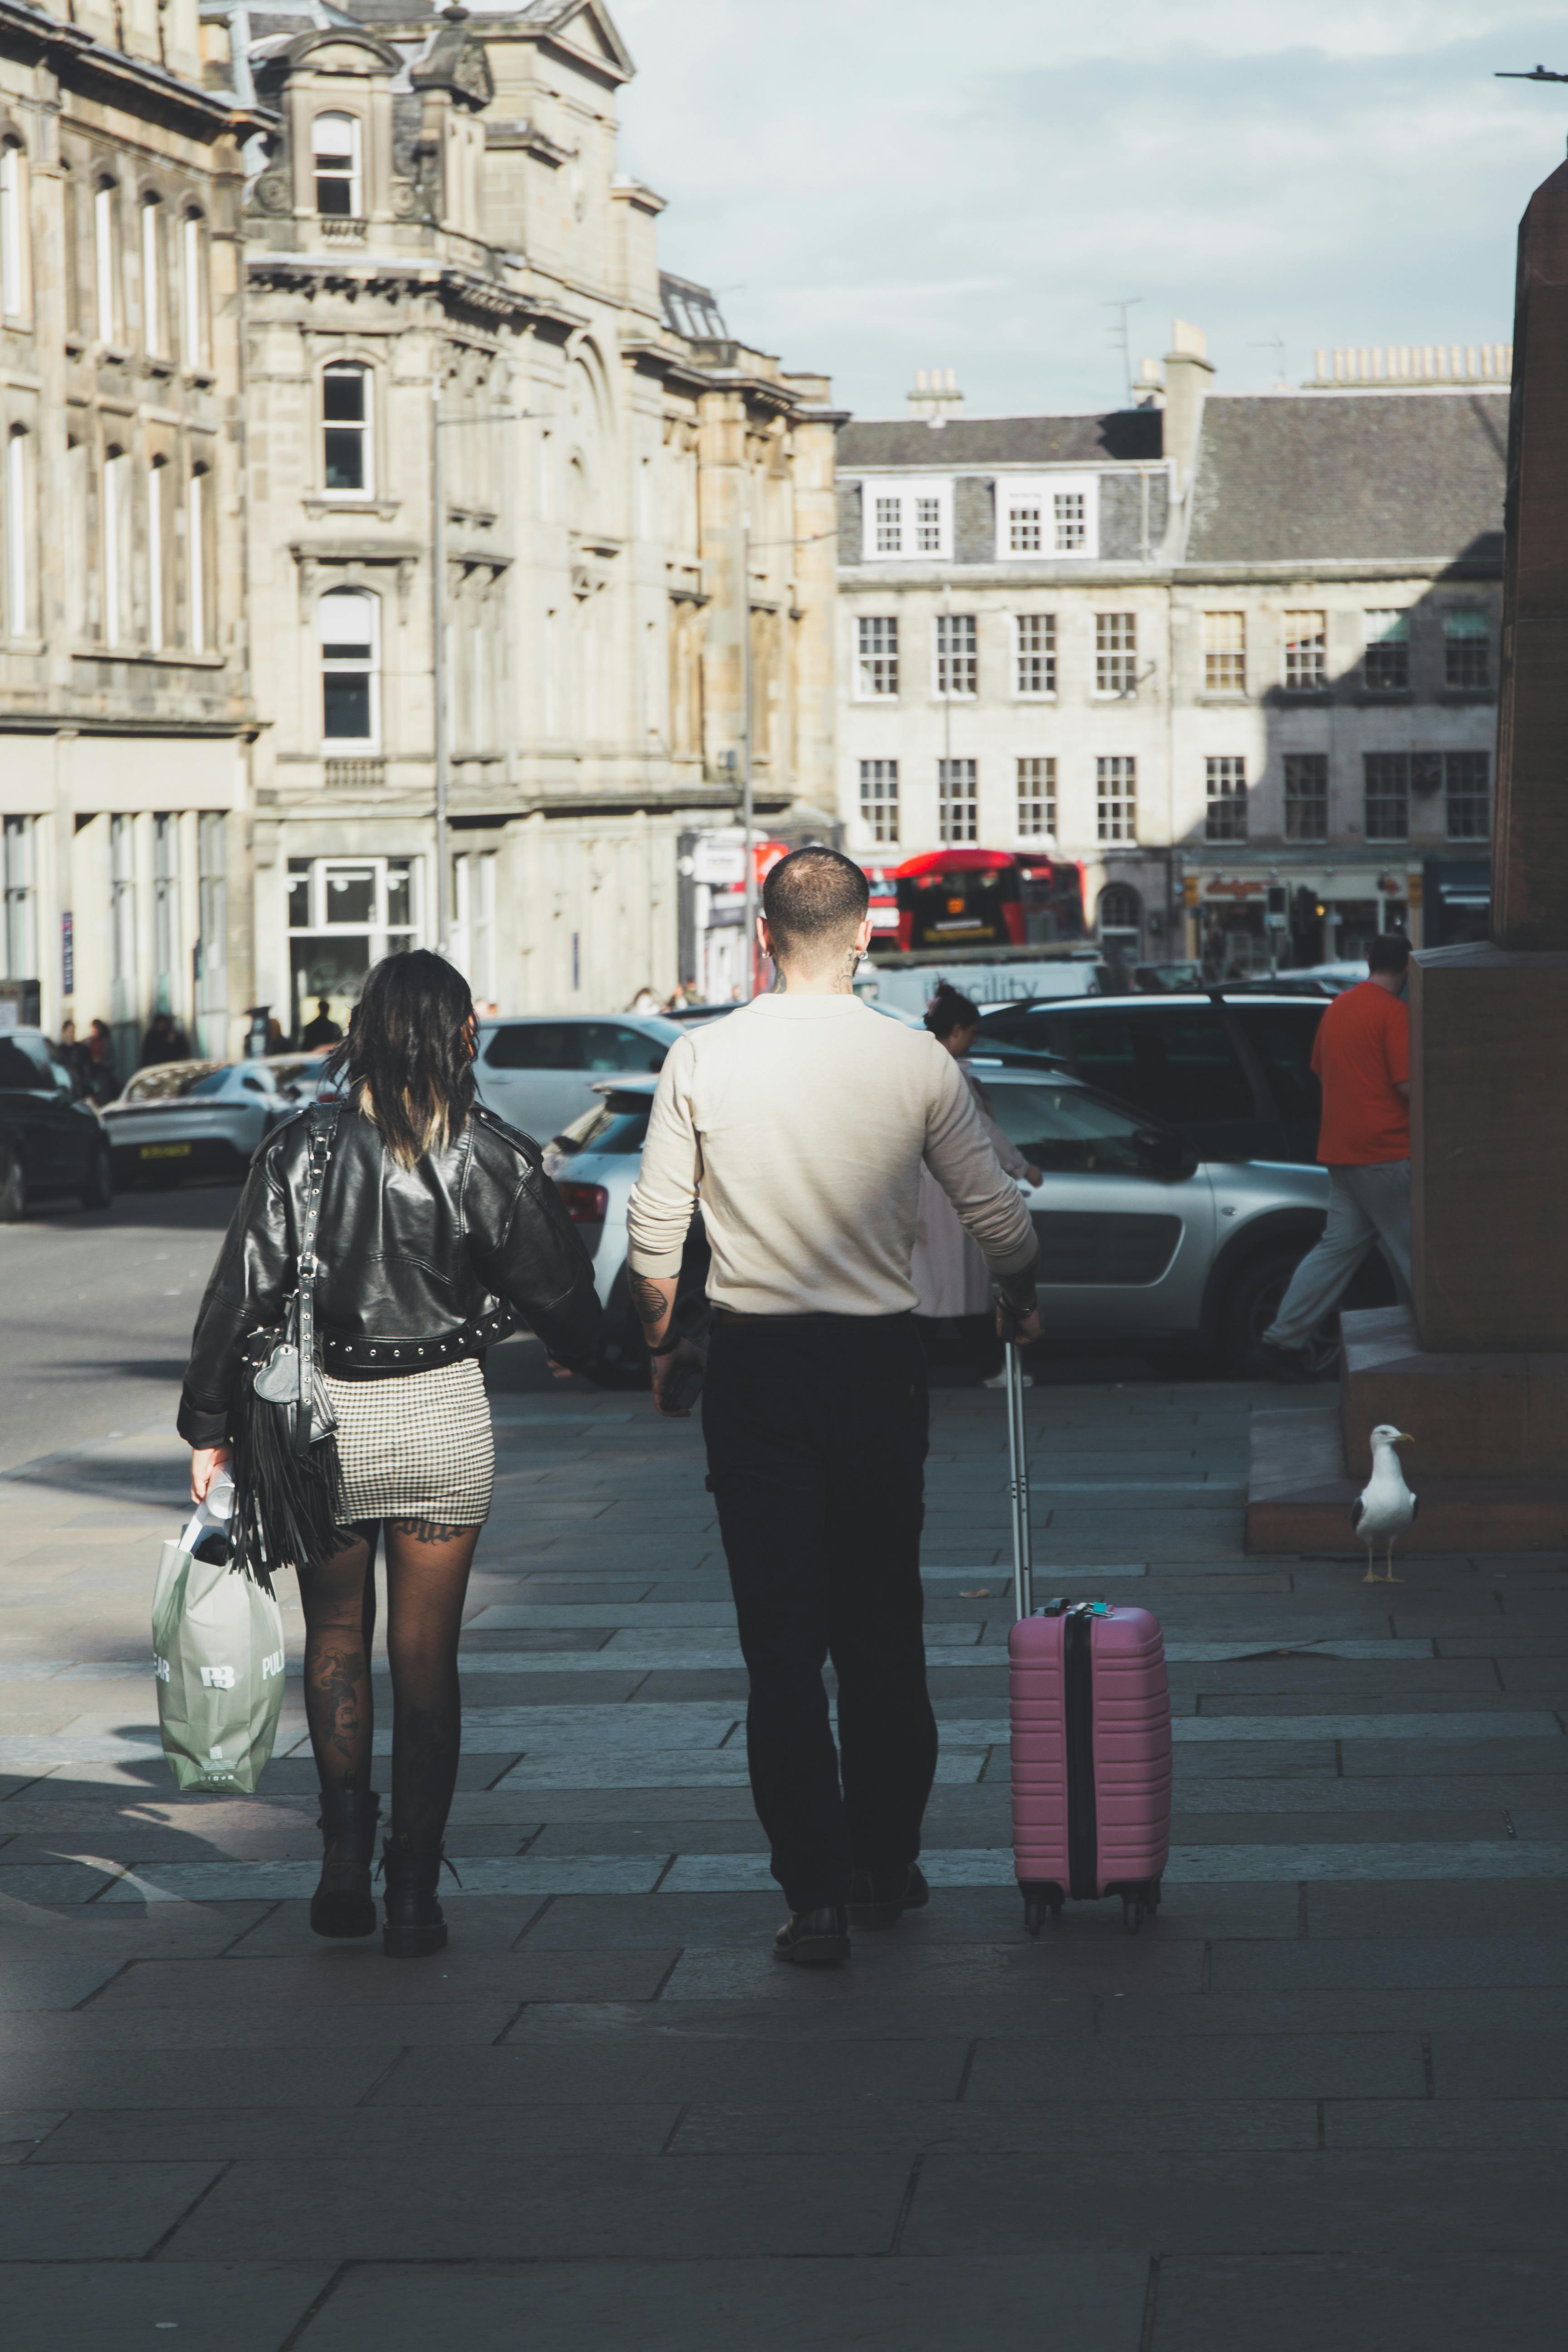 A couple with their luggage | Source: Pexels